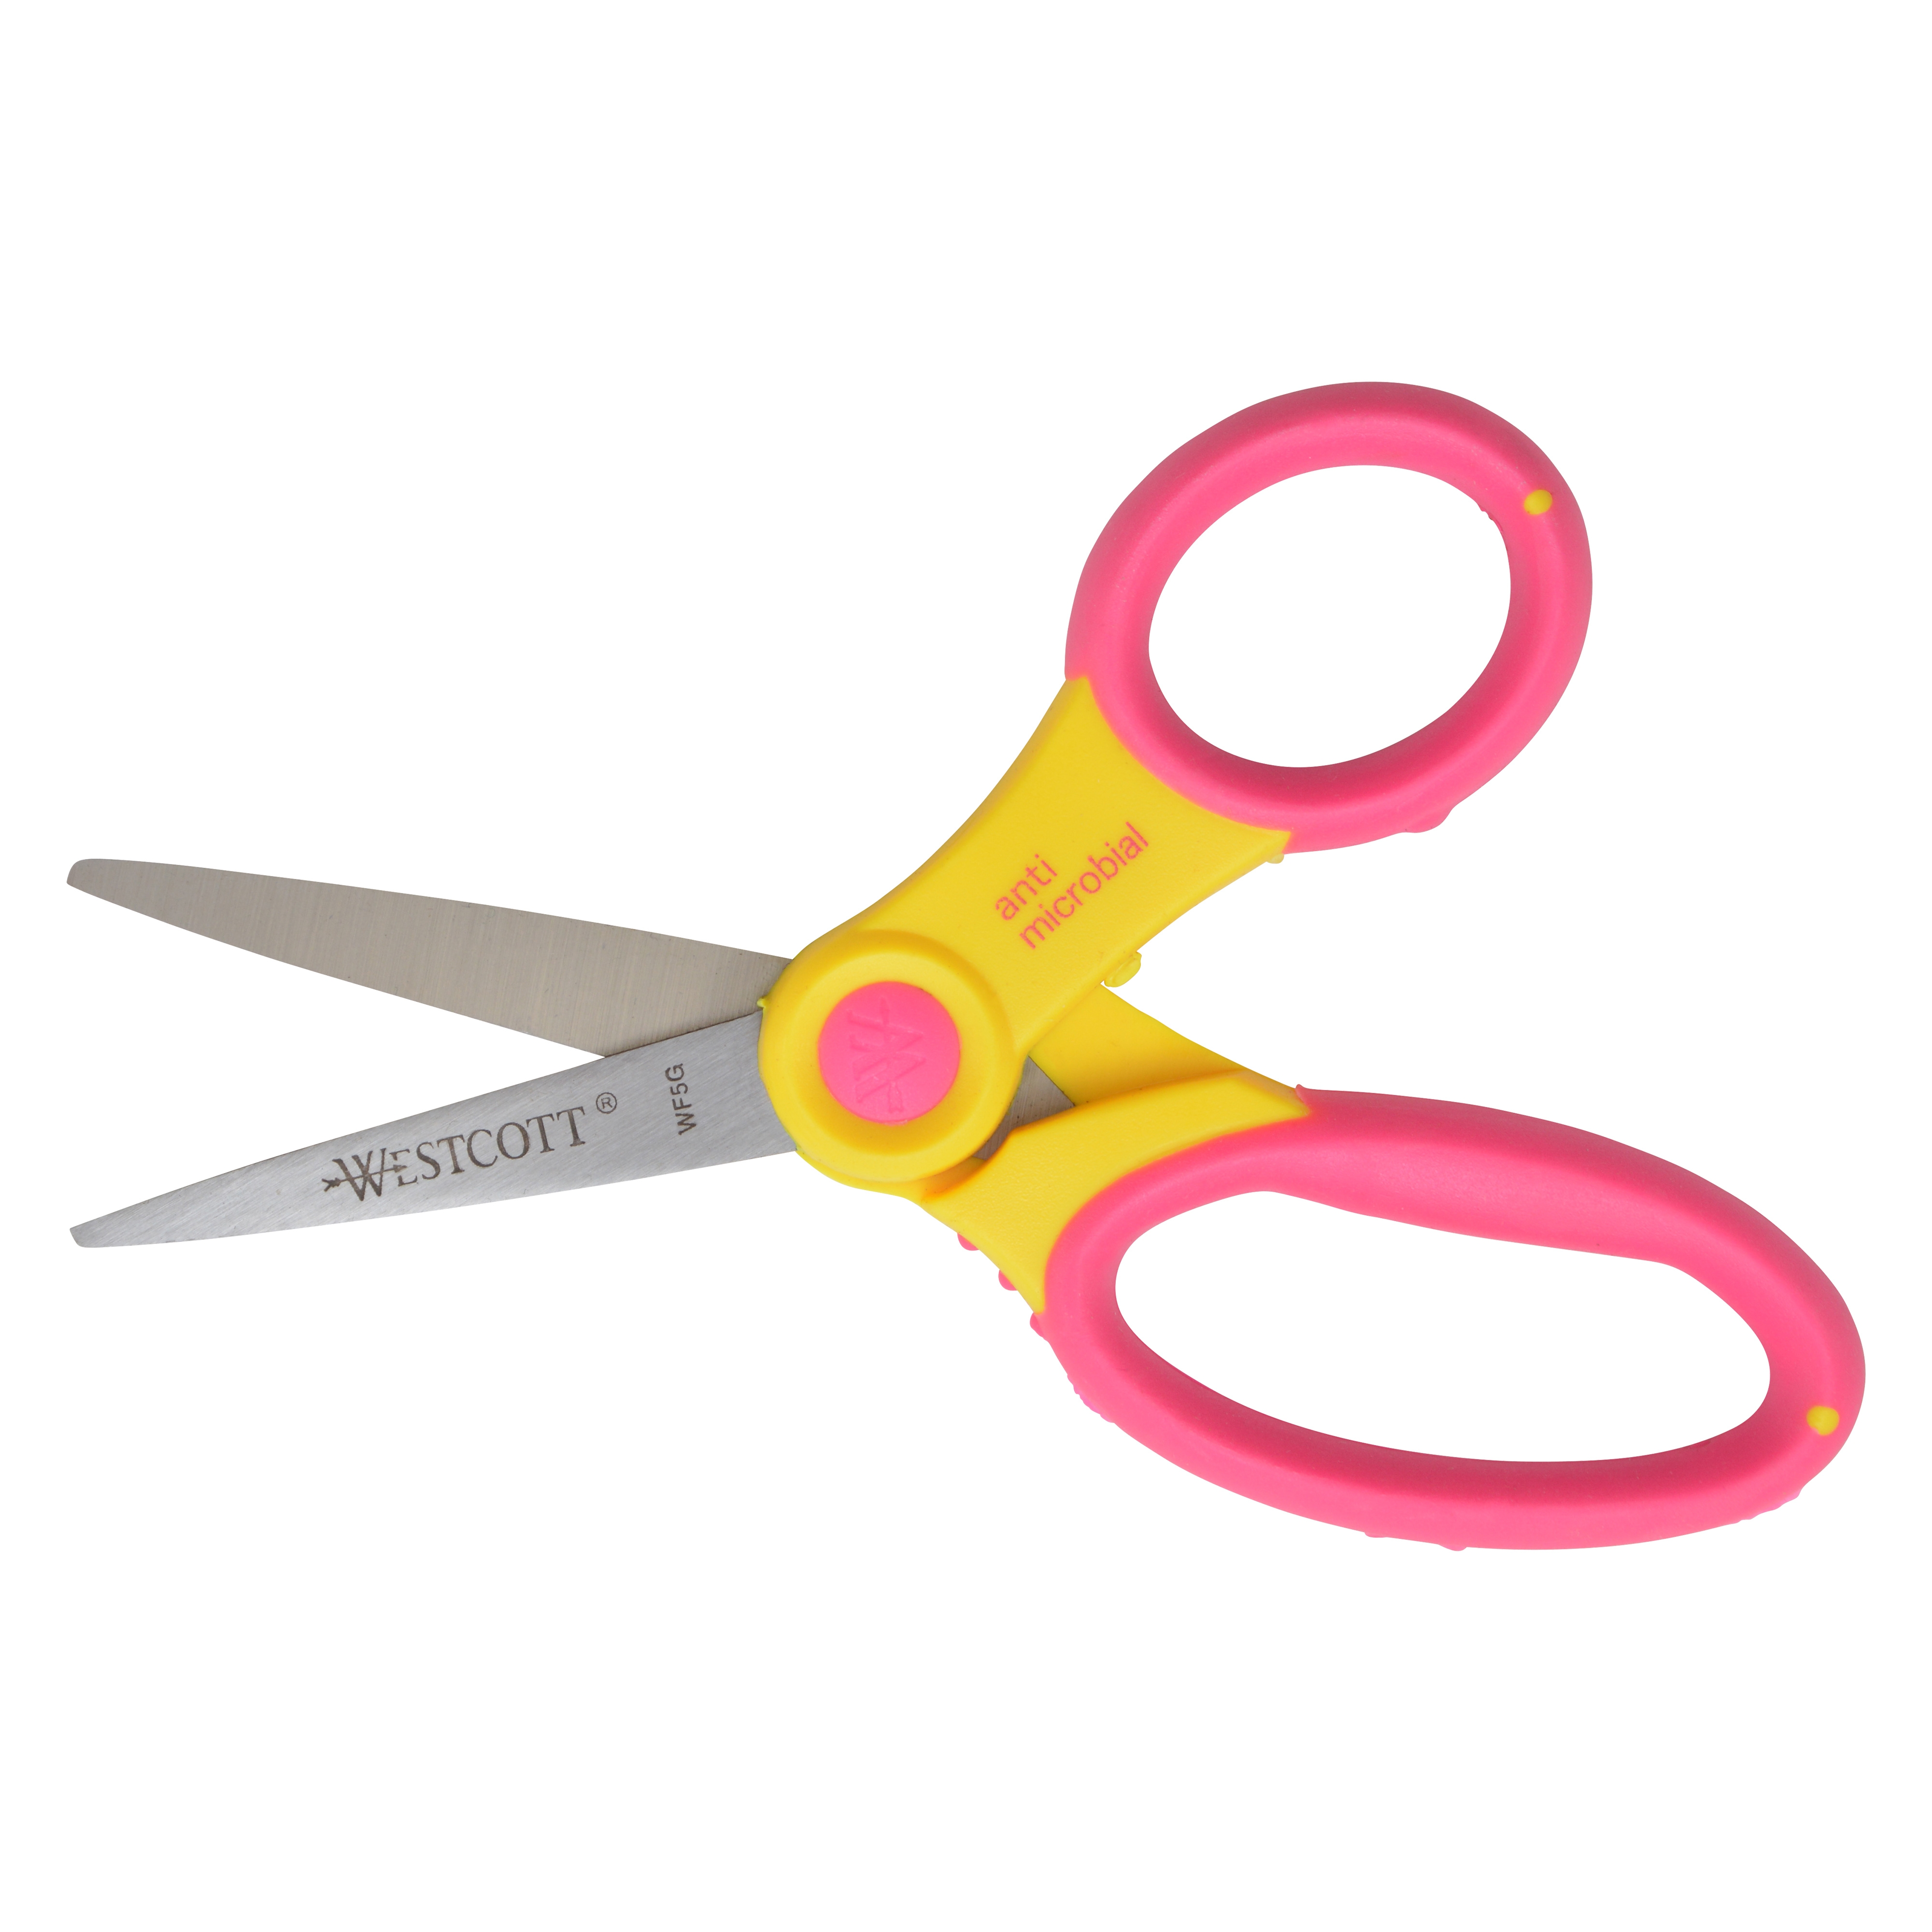 Westcott Student Scissors With Antimicrobial Protection Assorted Colors 7  Long